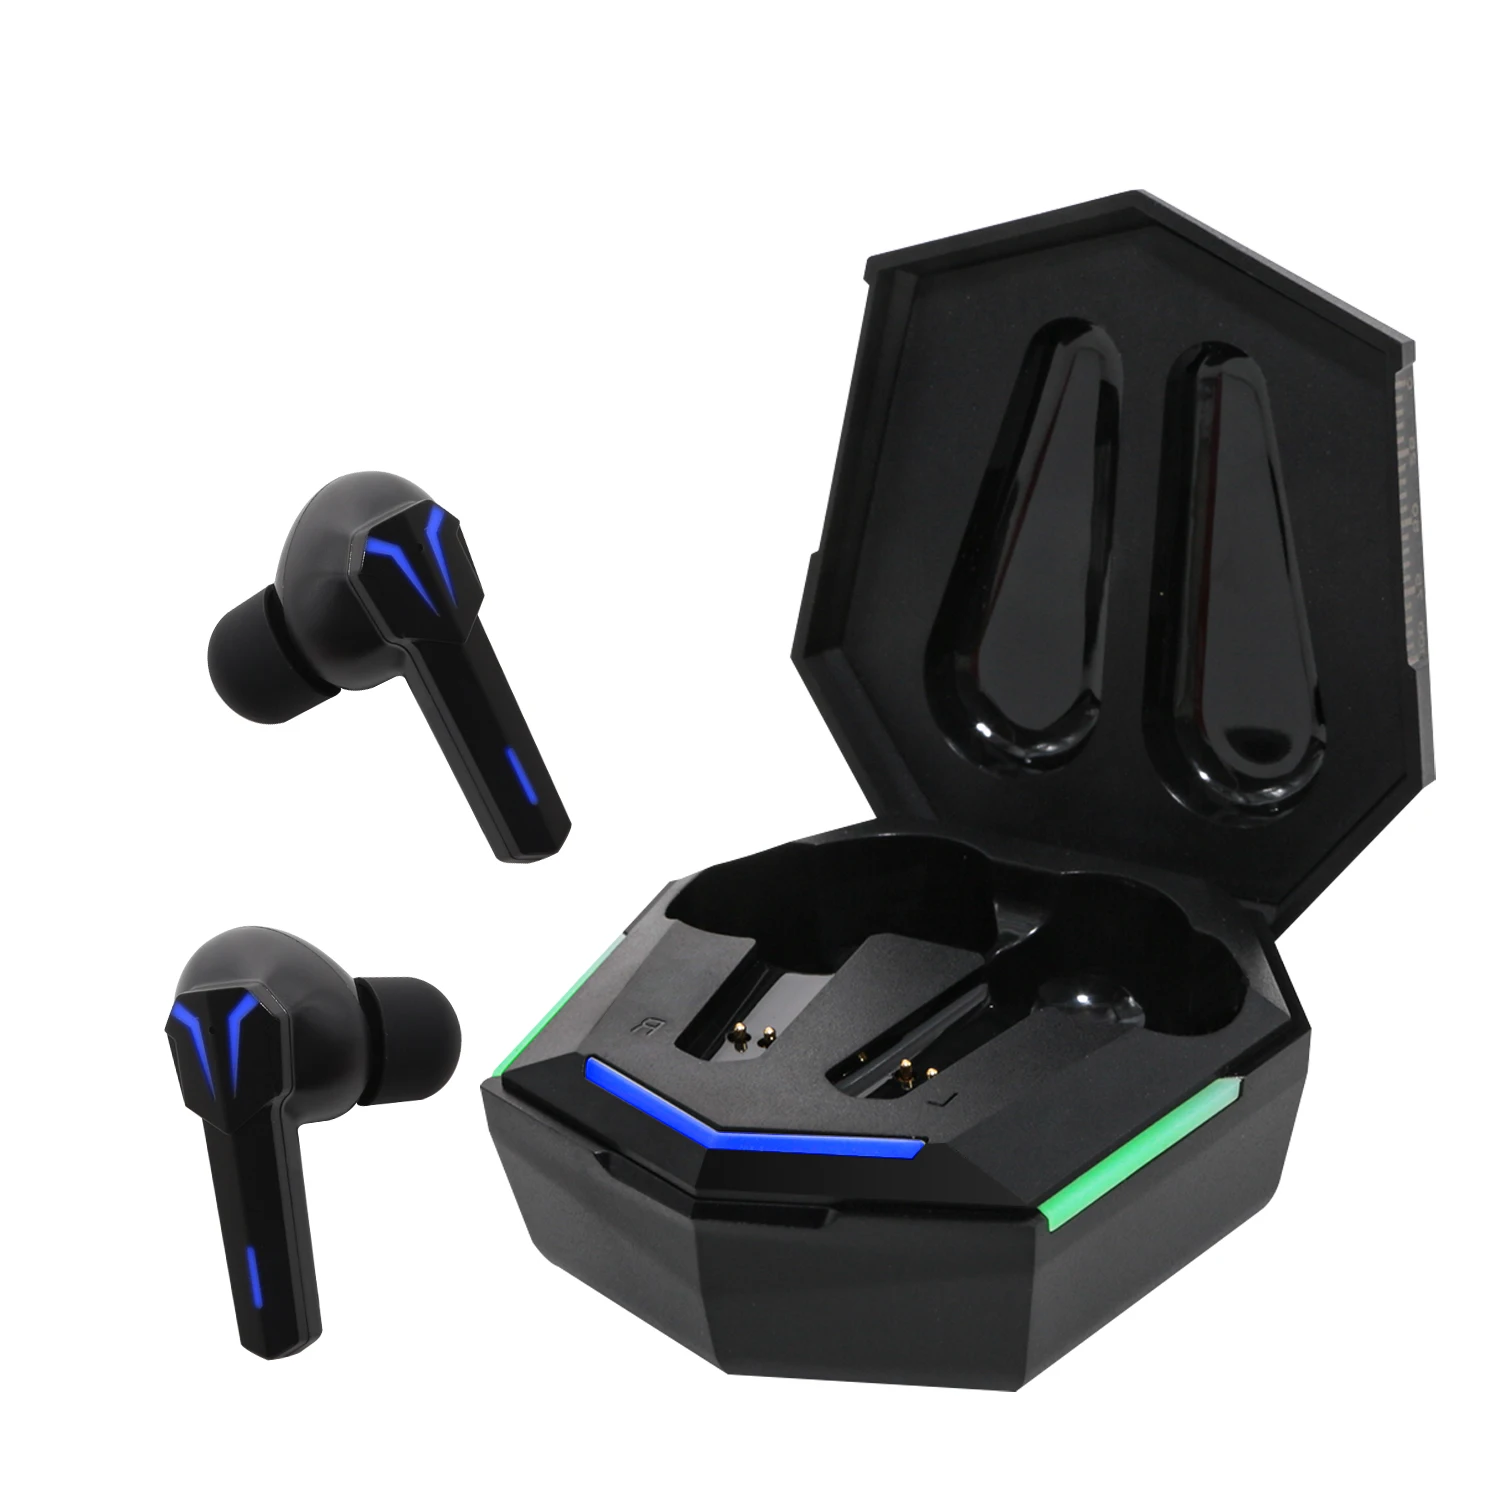 KINSGTAR Gaming Sport TWS Earphones LED Display Mini BT Headsets Wireless Earbuds With LED Charging Case